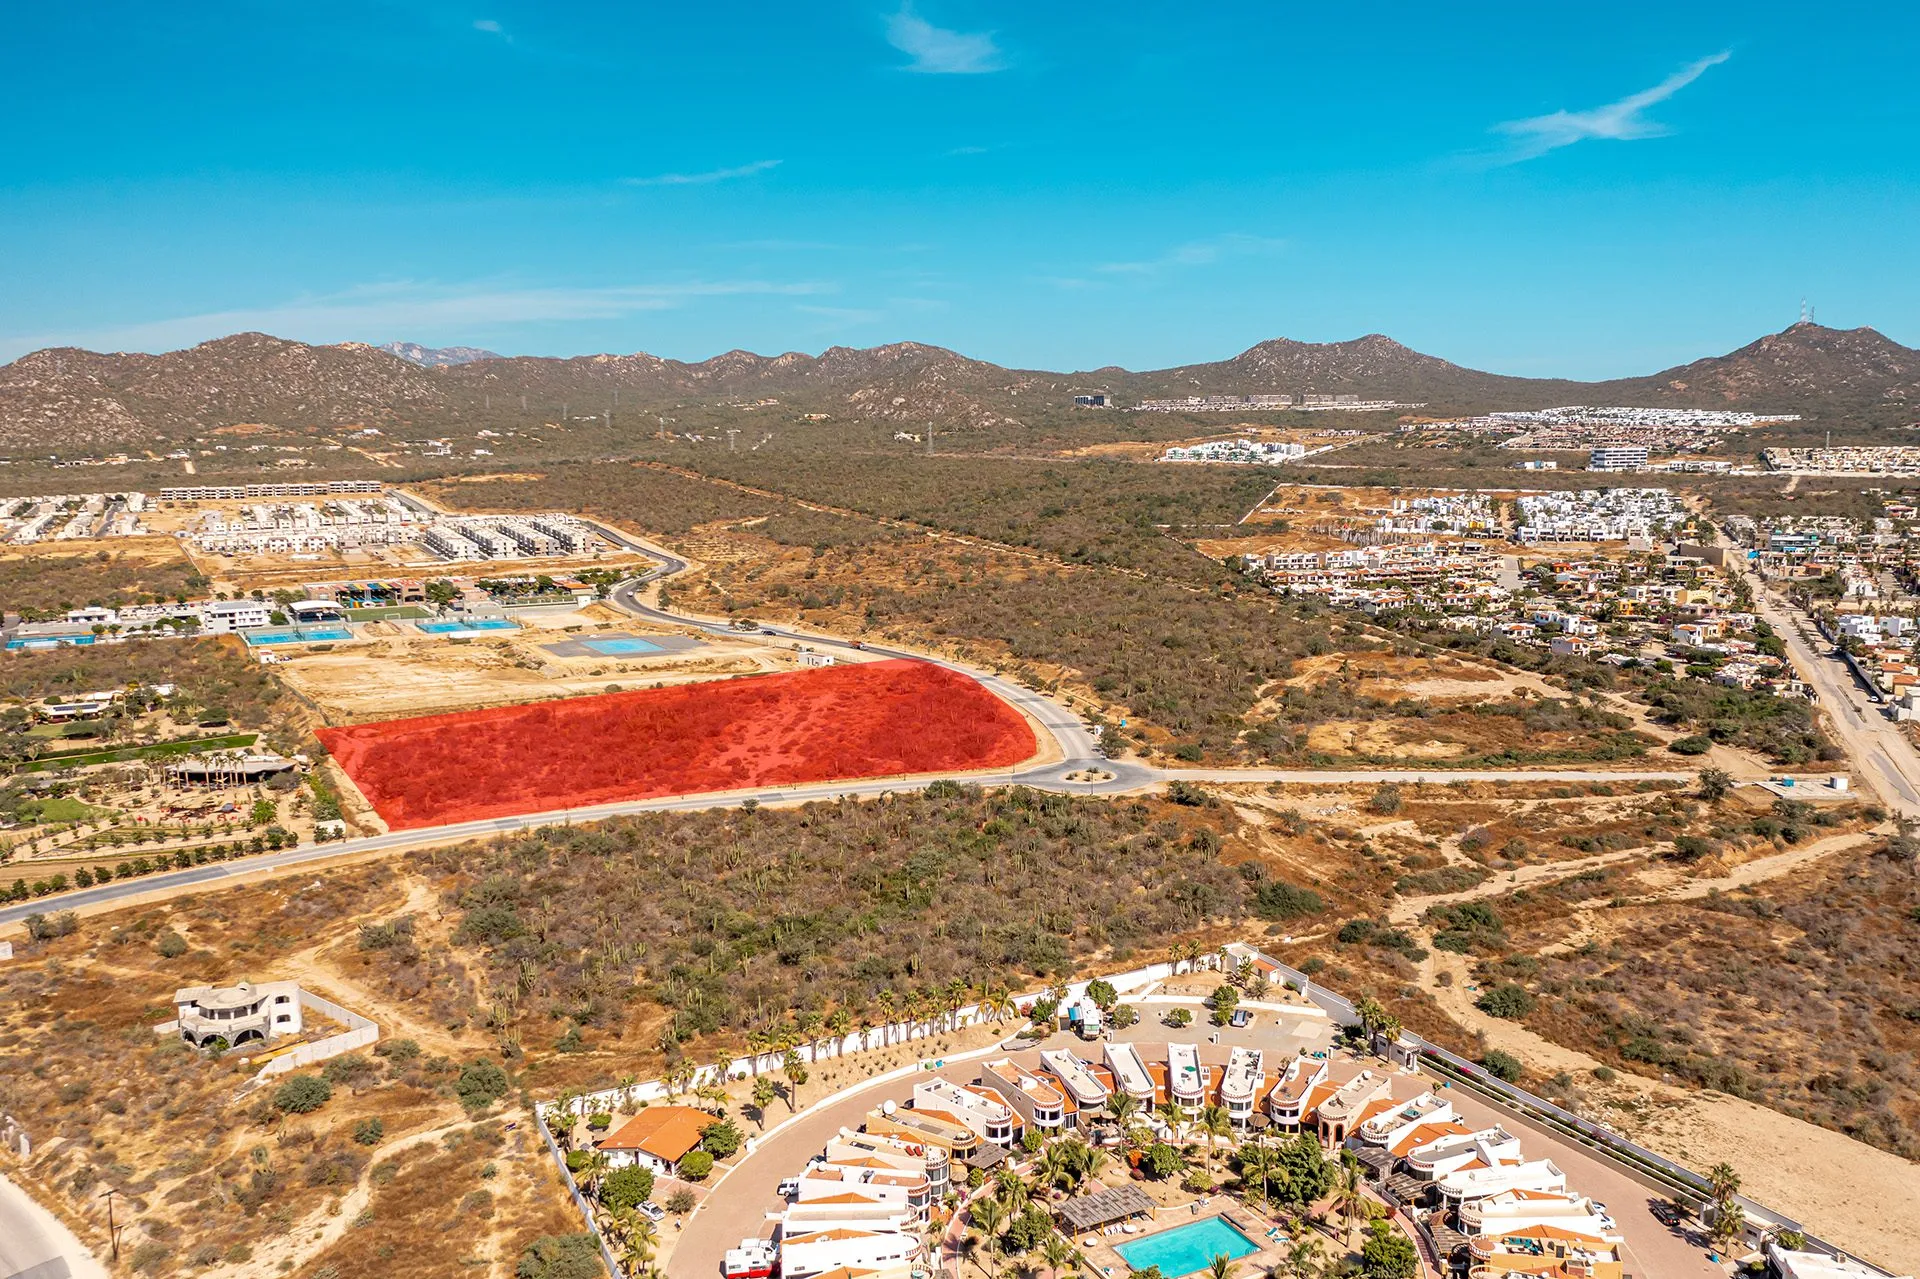 Lot III, is an excellent option for comercial or residential development. This 6.8 acre parcel is located inside one of the most popular communities in Los Cabos.